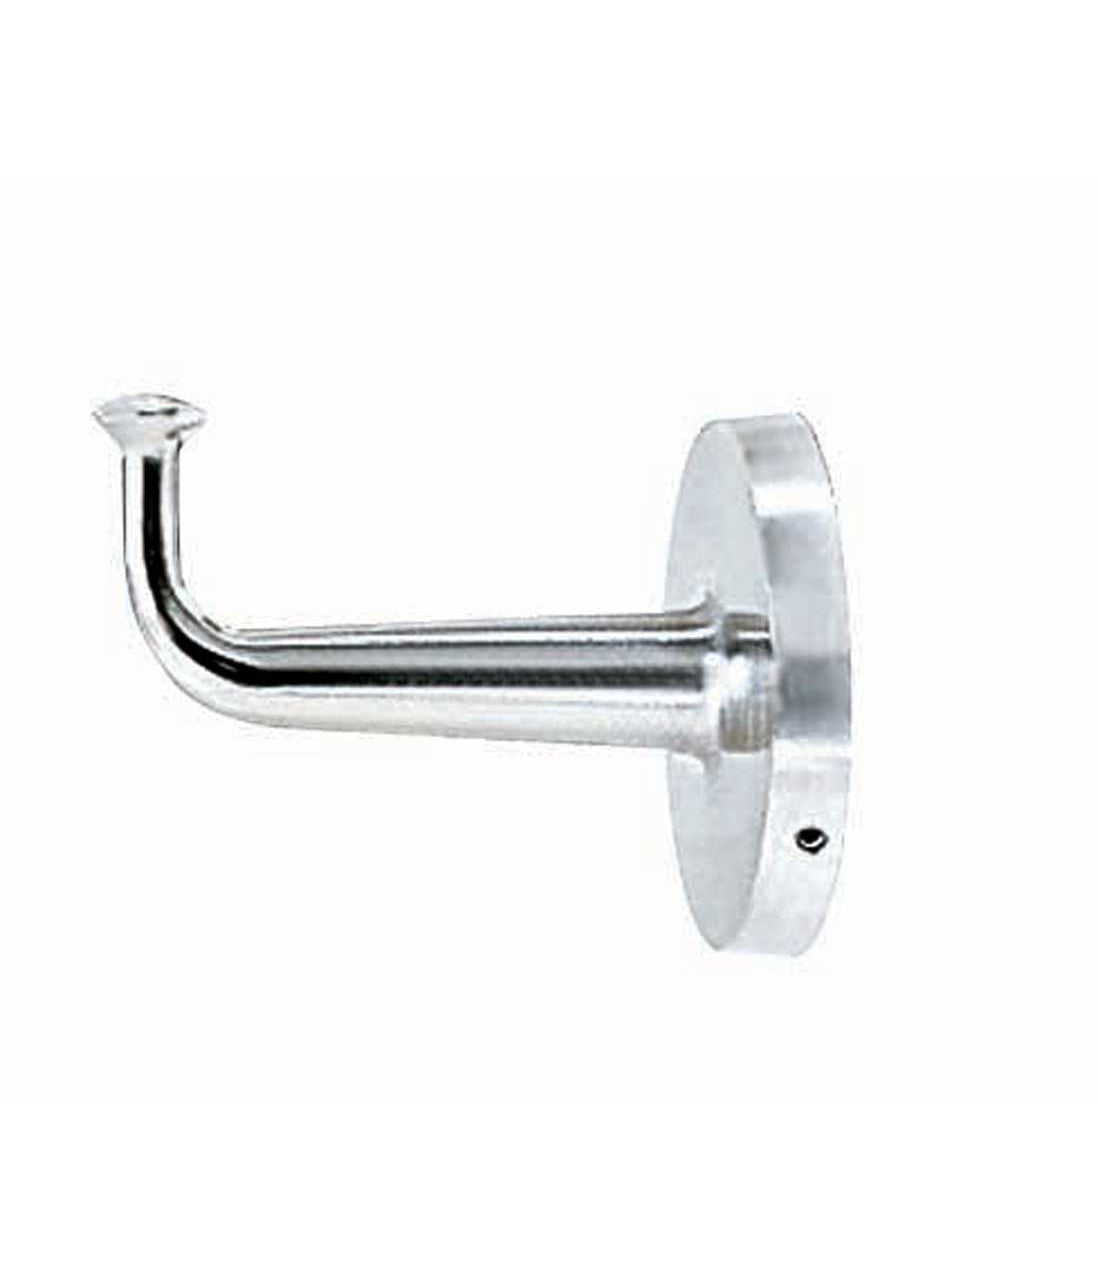 The Bobrick B-2116 is a heavy-duty clothes hook made of a brass casting with a satin nickel-plated finish.